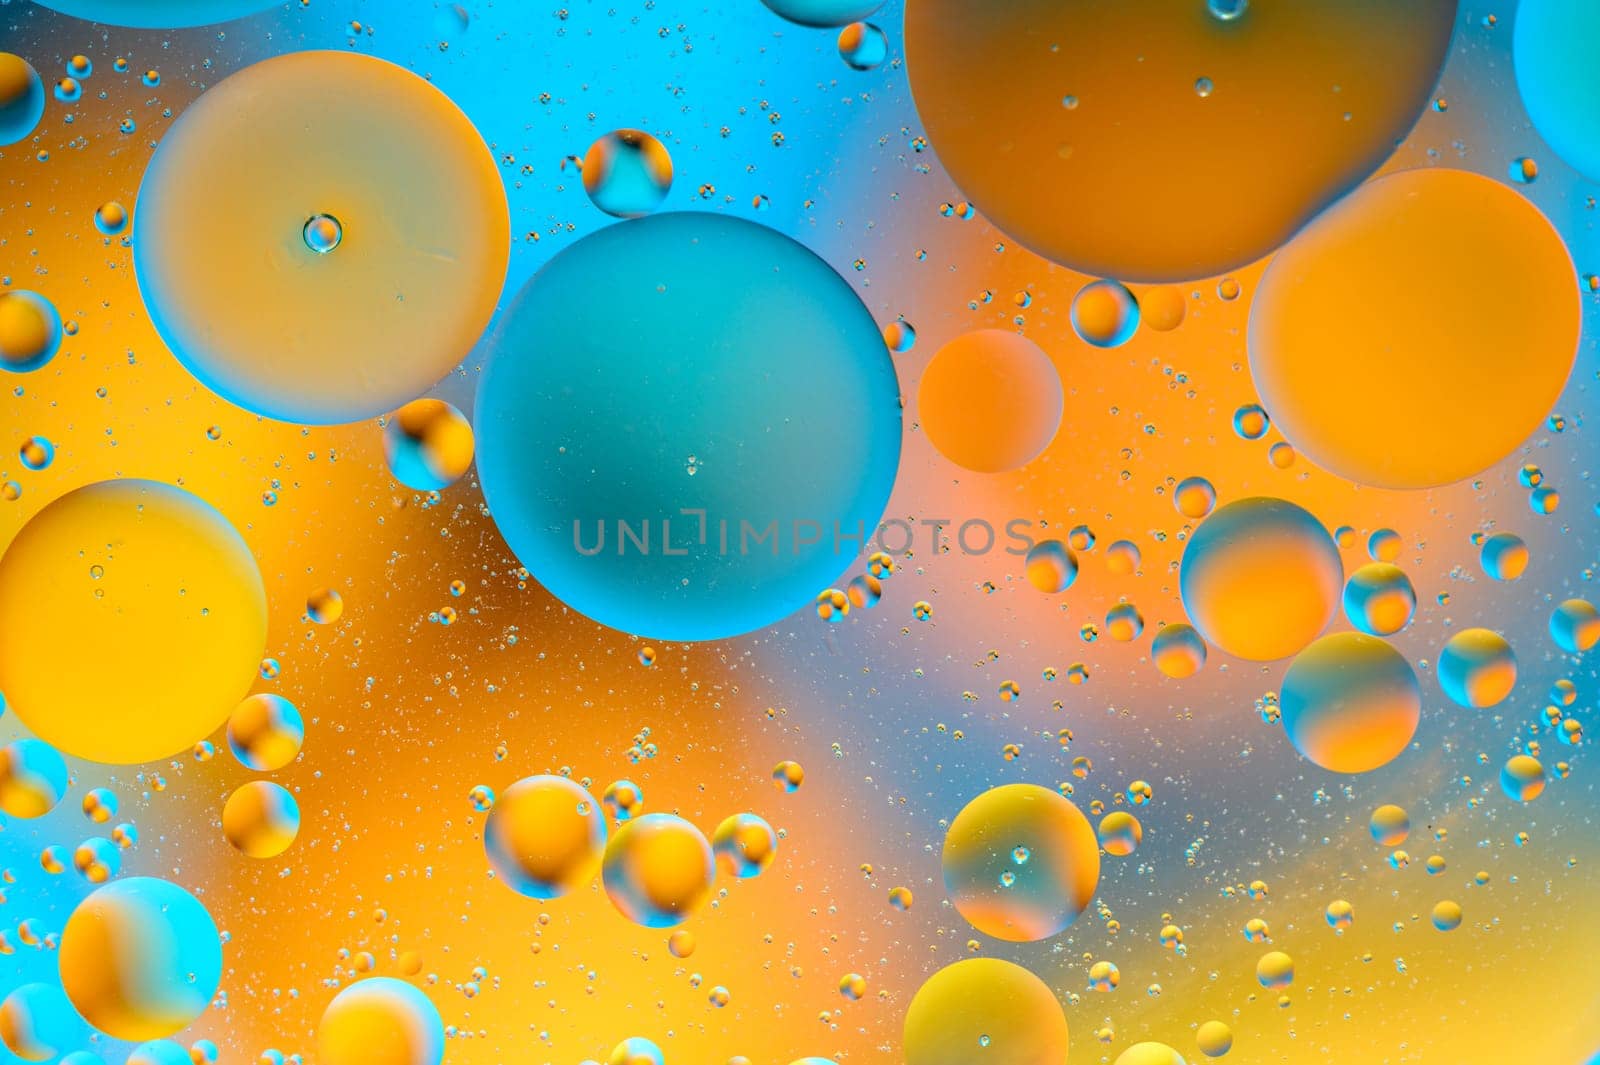 abstract background of multi-colored spots and circles microcosm universe galaxy 15